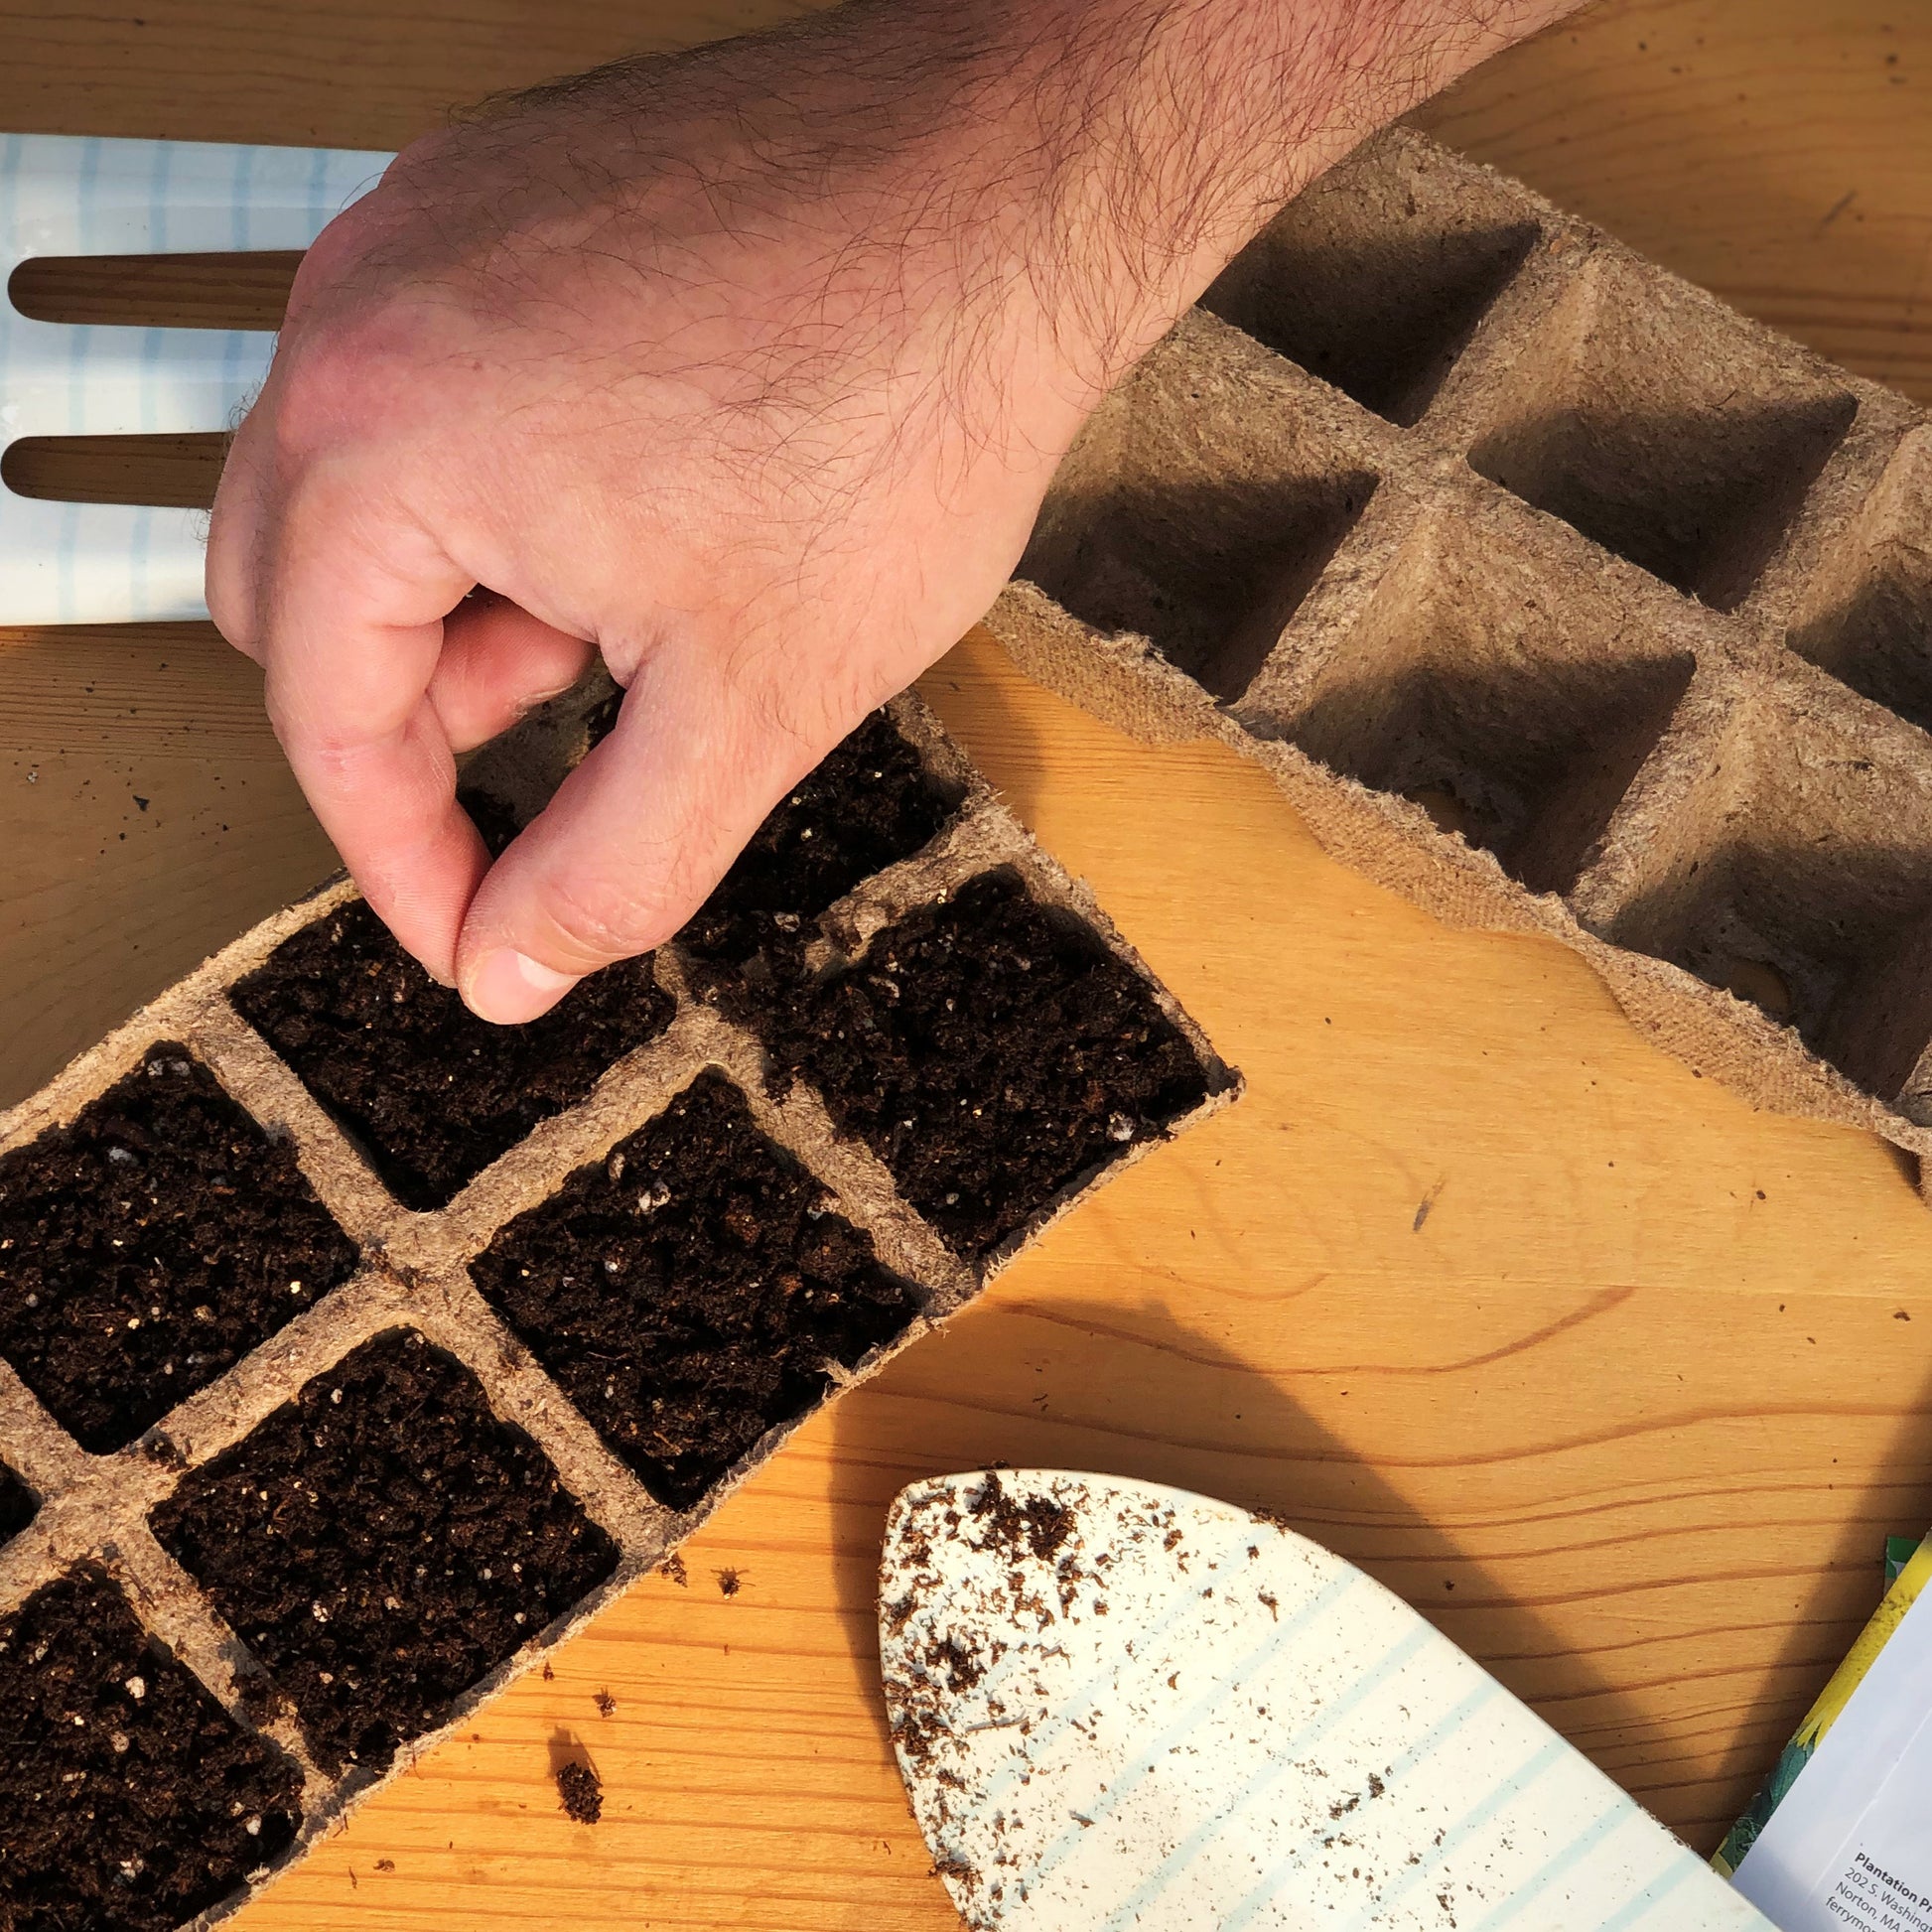 Start Black Beauty Squash seeds in biodegradable peat strips filled with sowing mix.